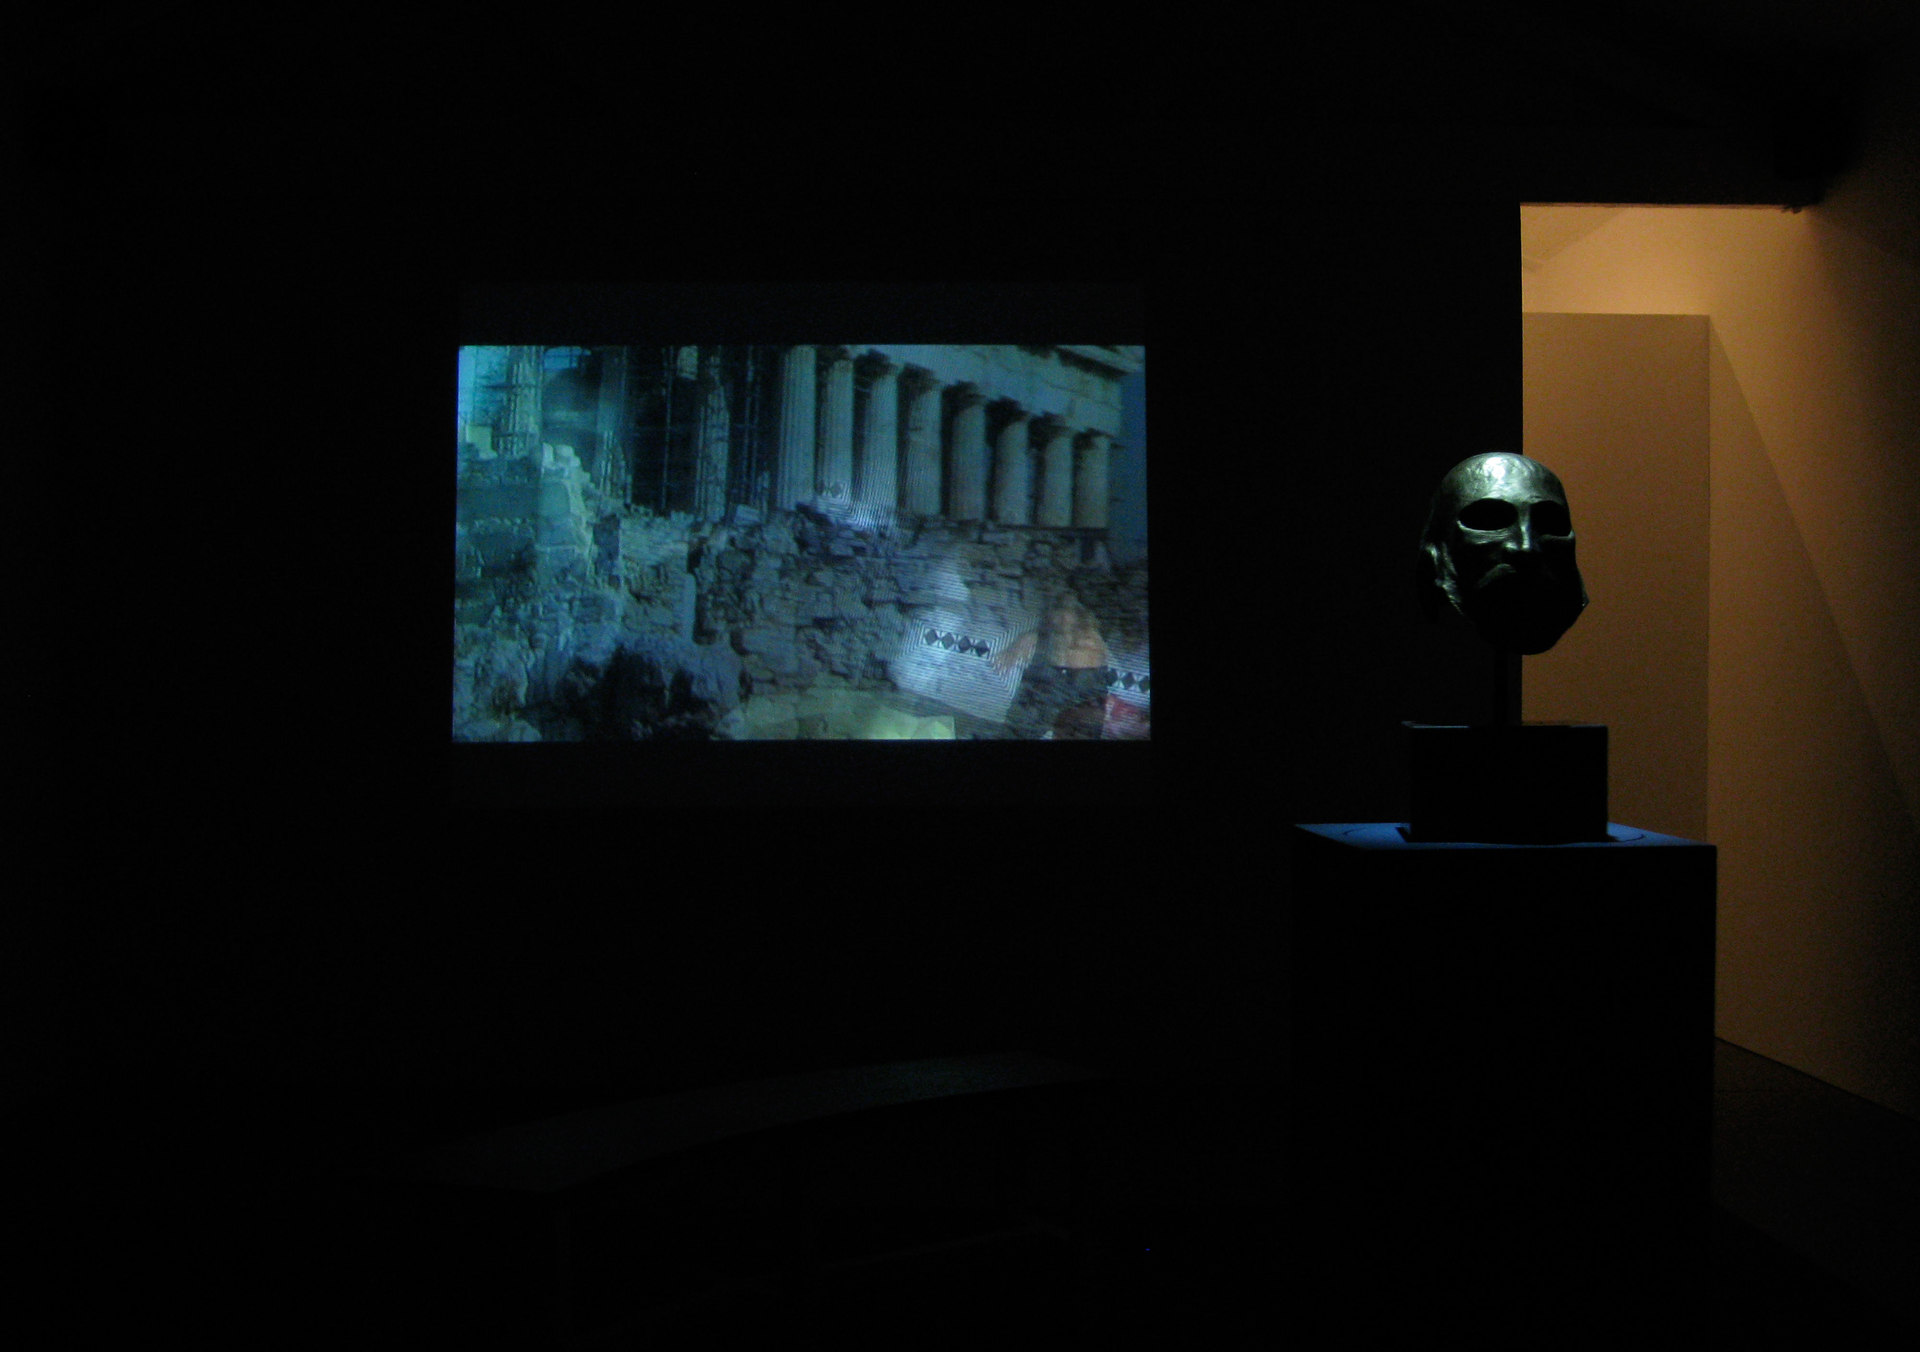 Mark Aerial Waller, 'Secret' still from Resistance Domination Secret, 2010, Cell Project Space